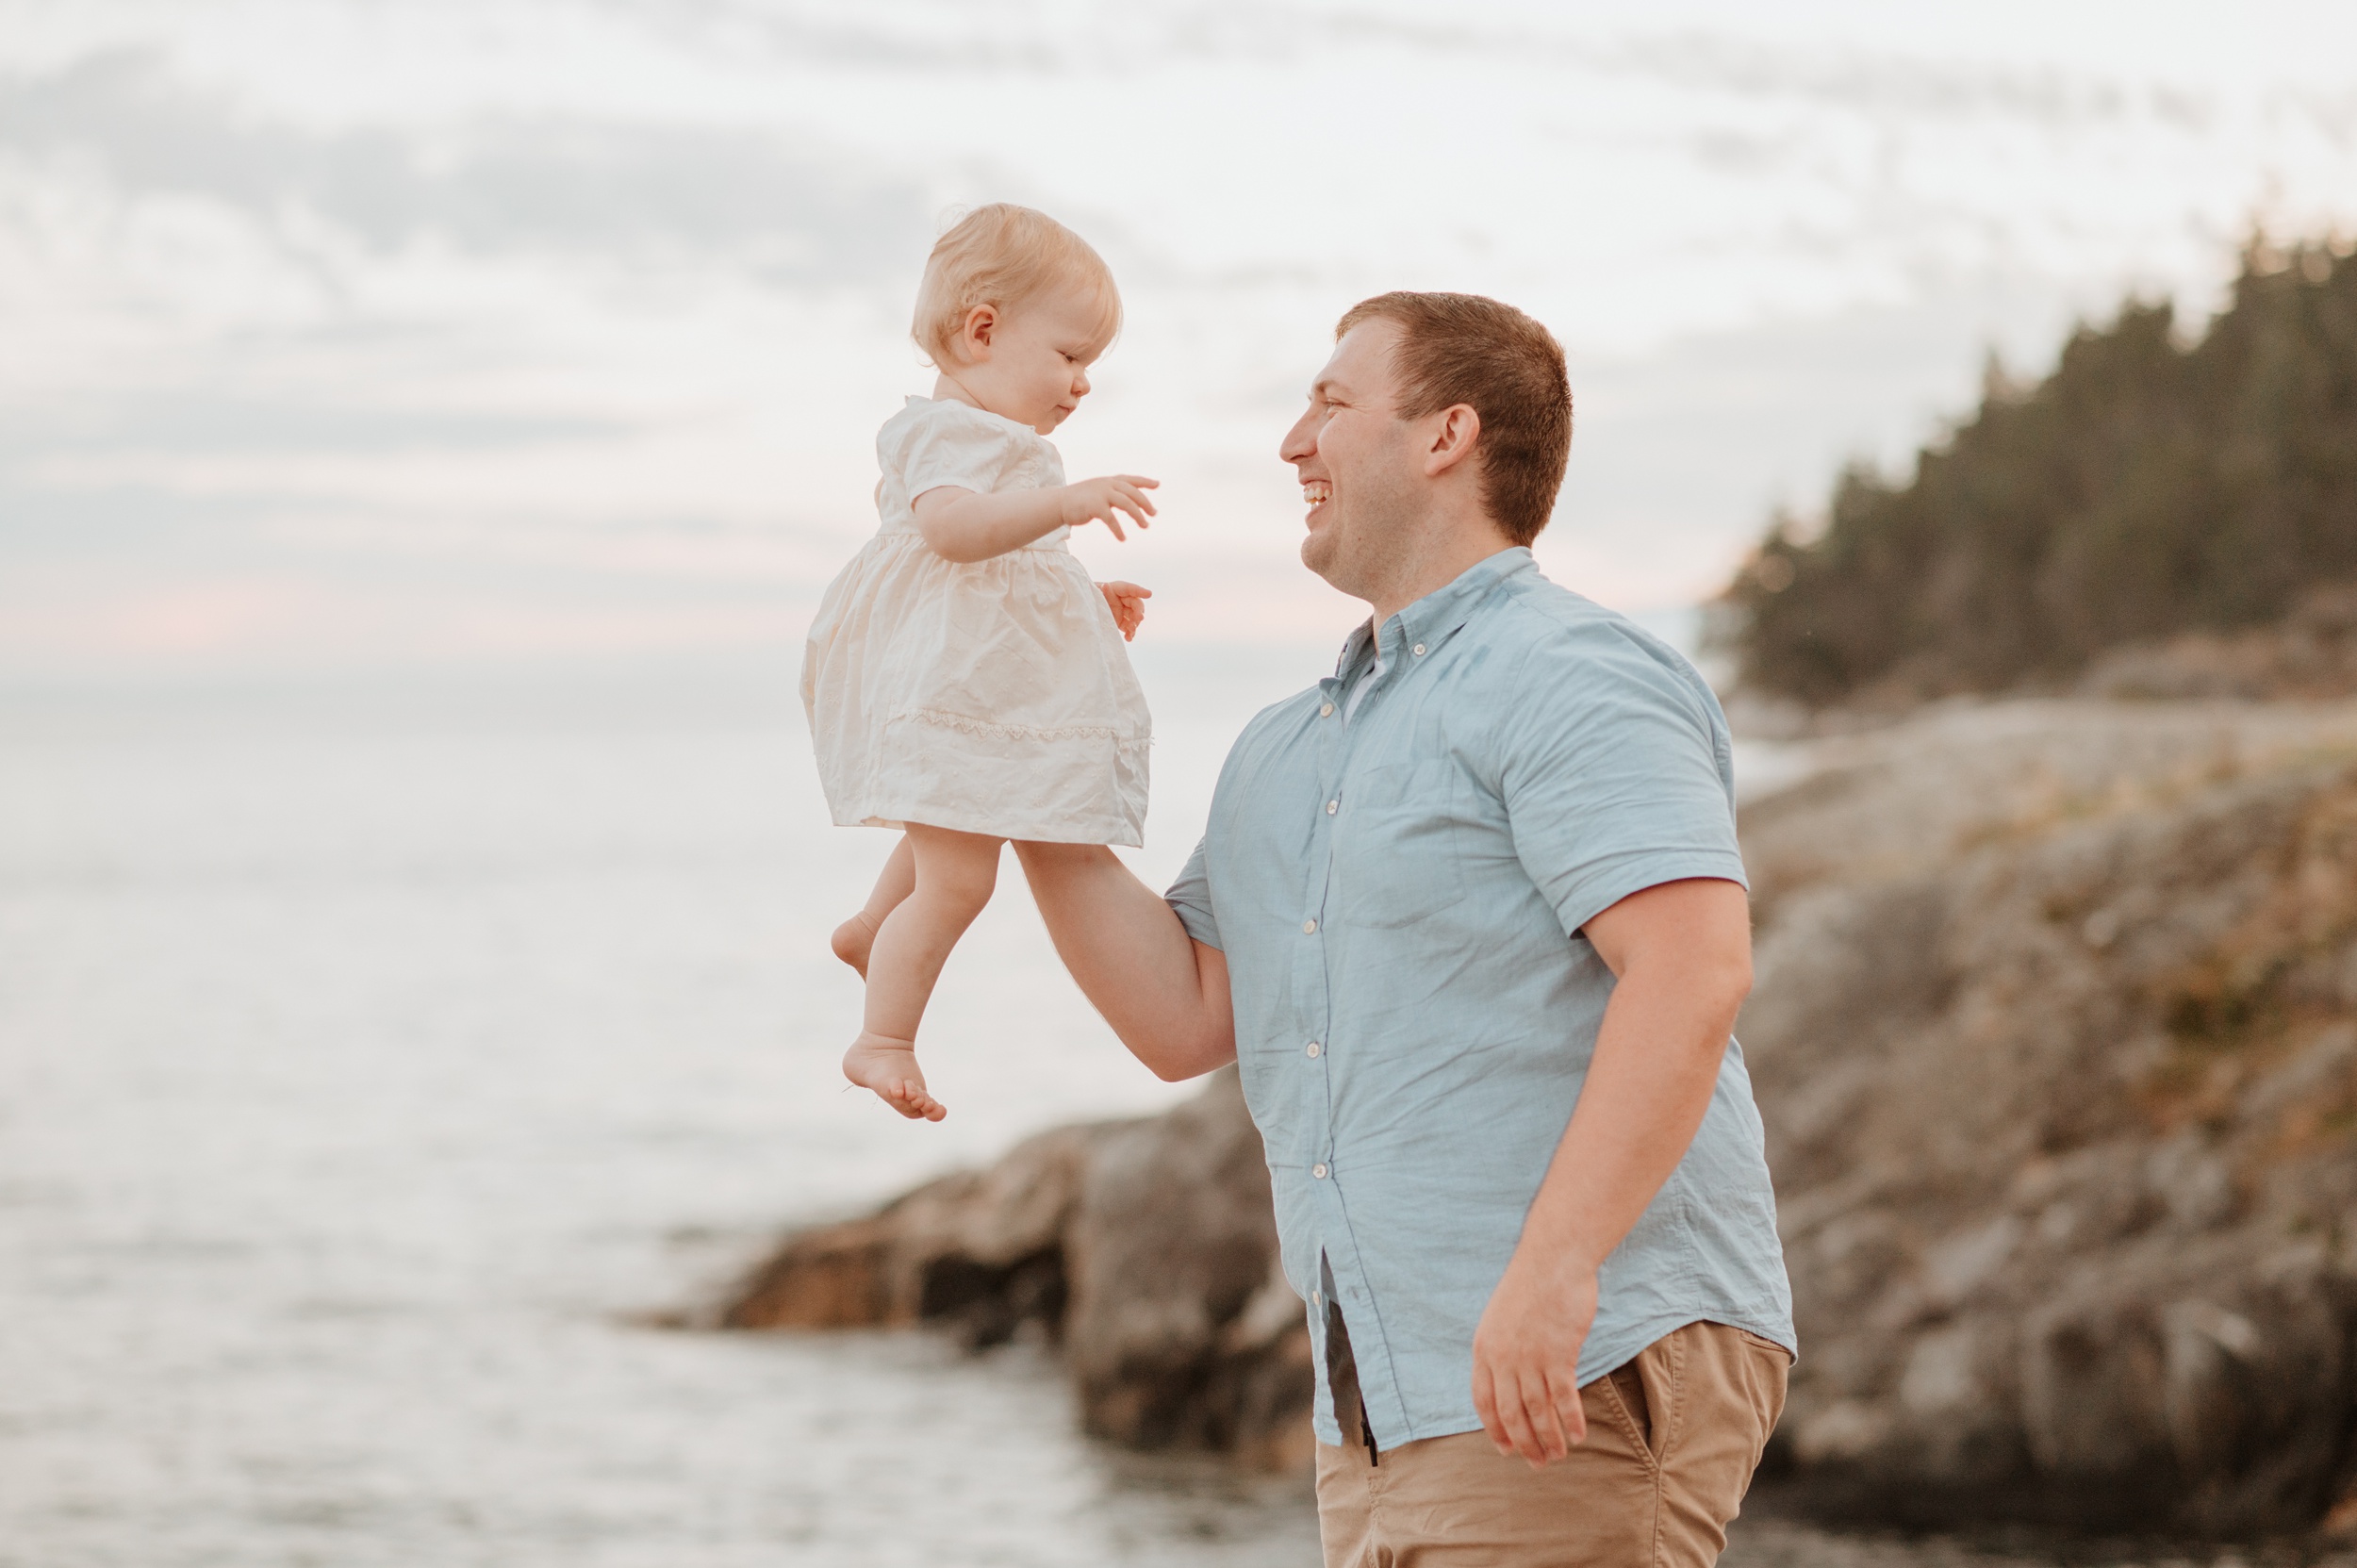 A dad lifts his happy toddler daughter with one arm on a beach at sunset